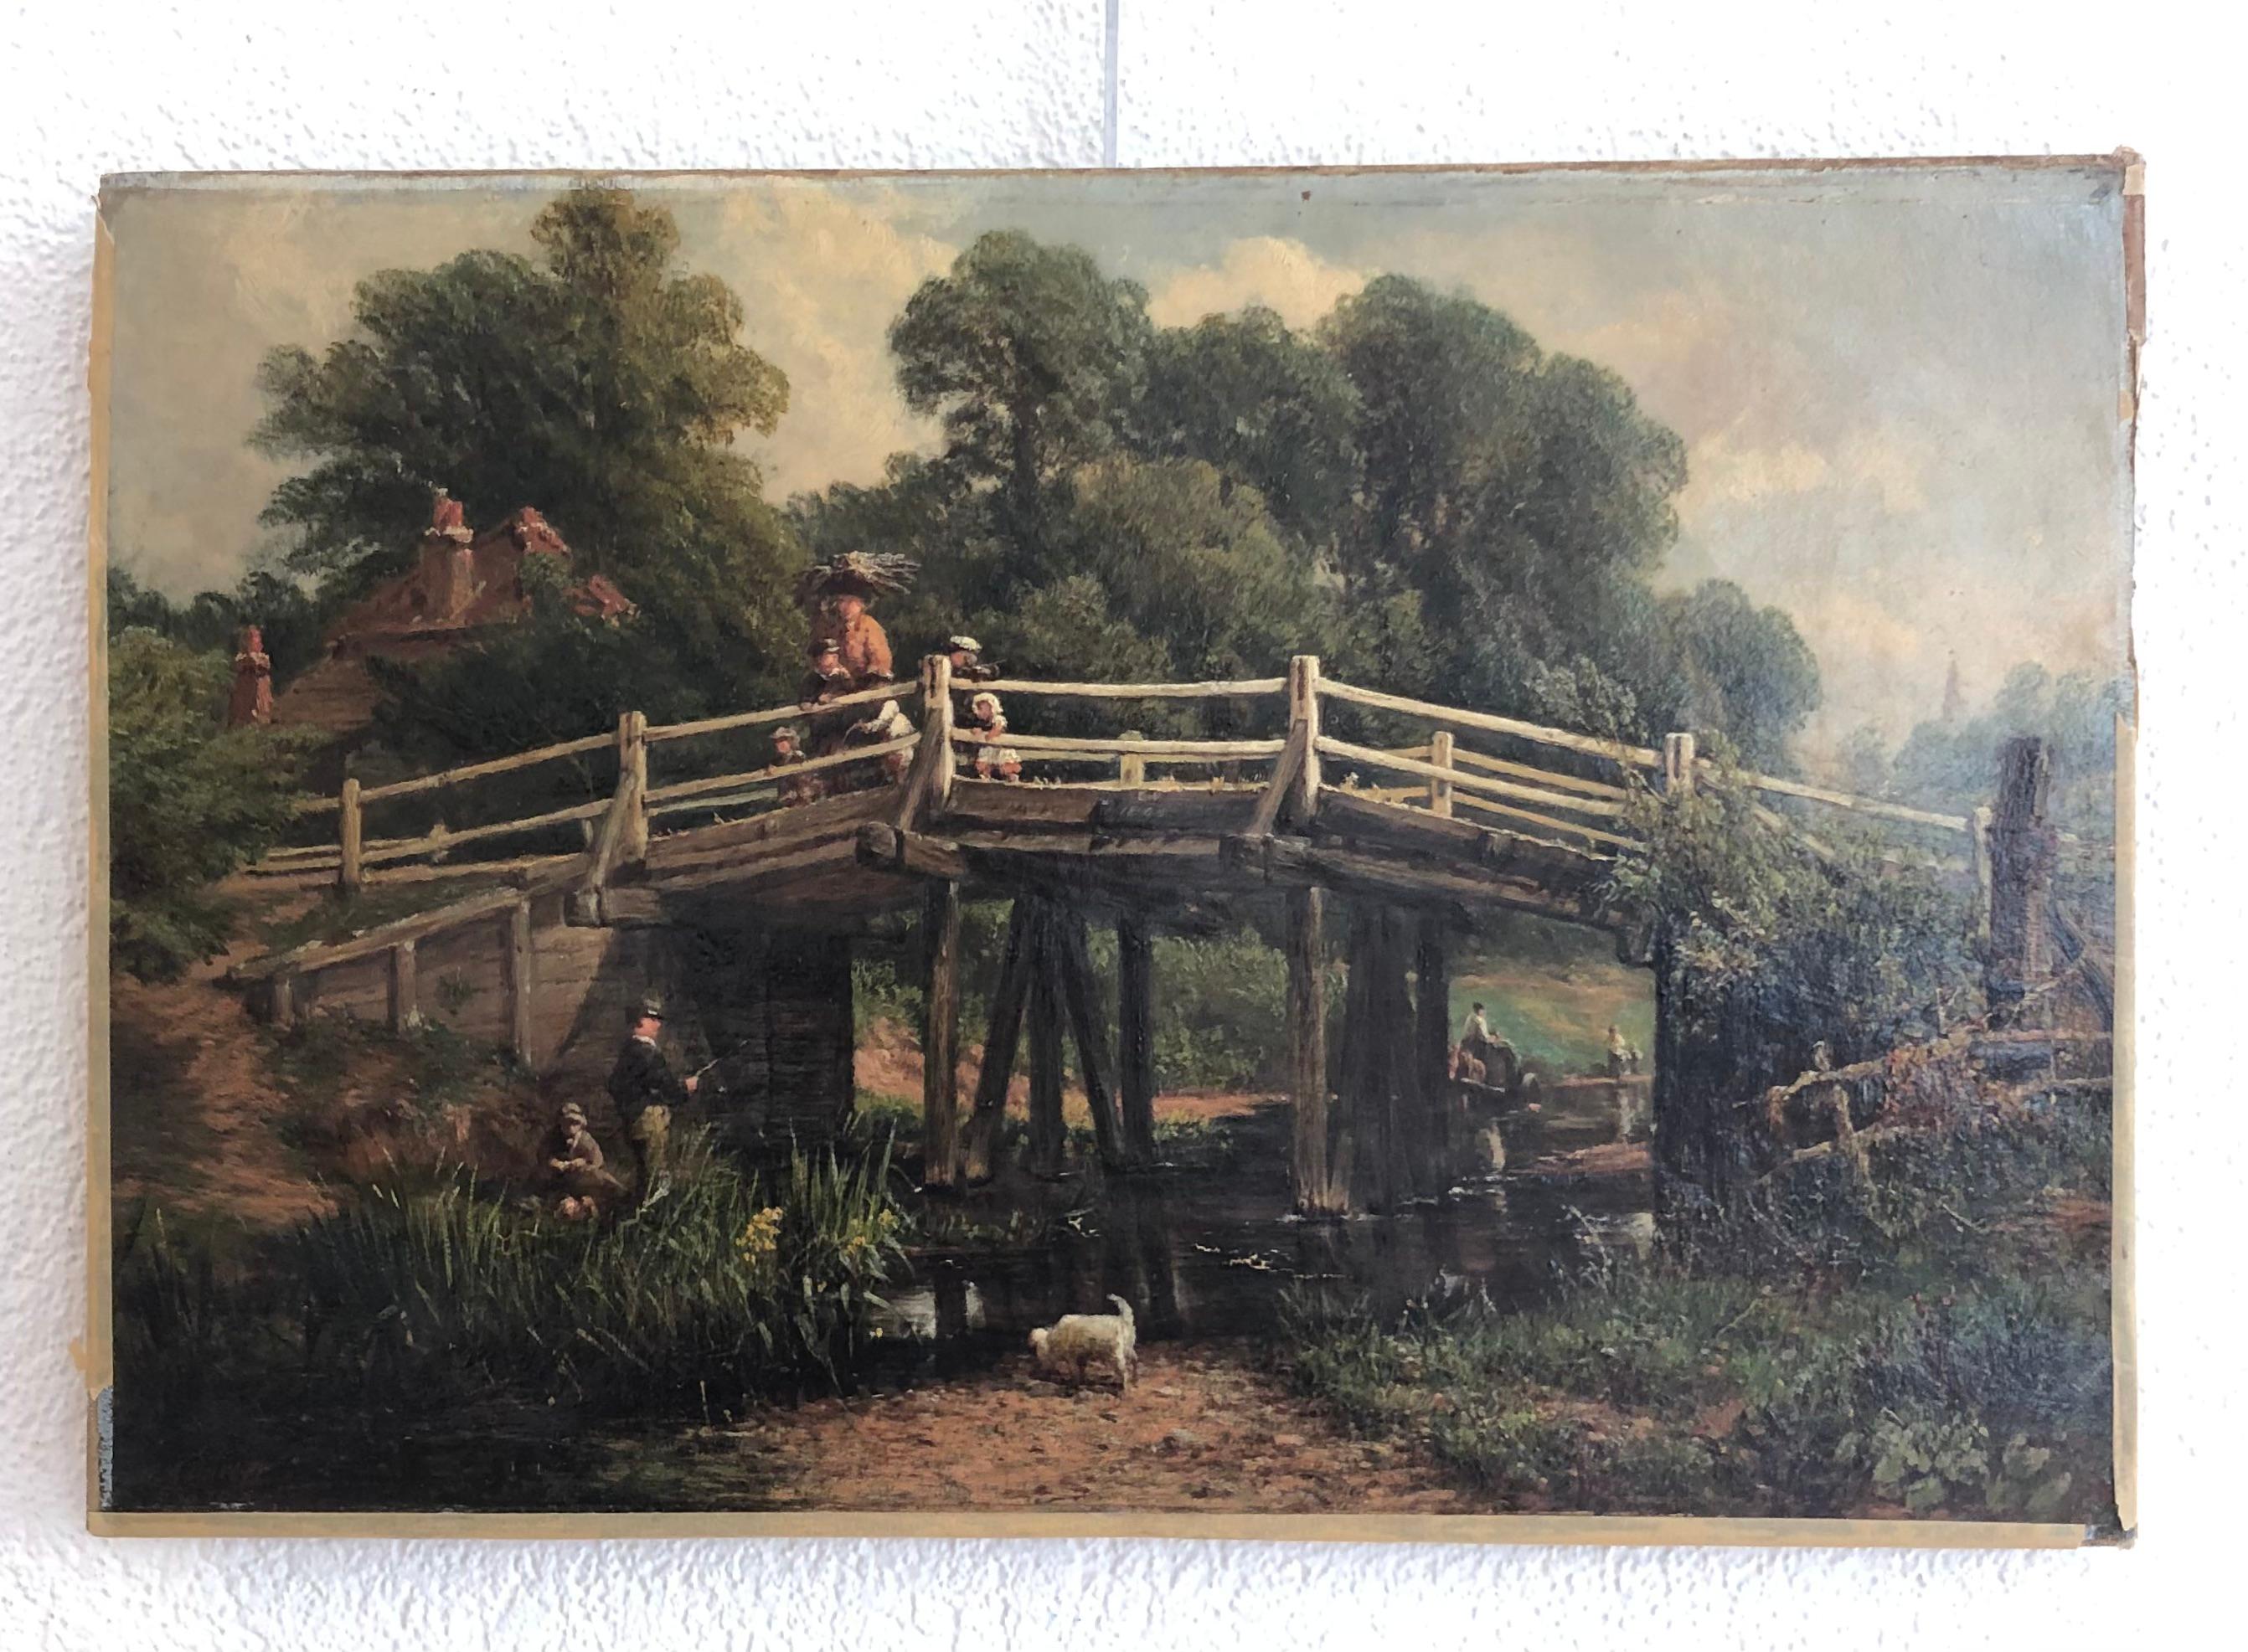 Lively countryside landscape - Painting by Joseph-Moseley Barber